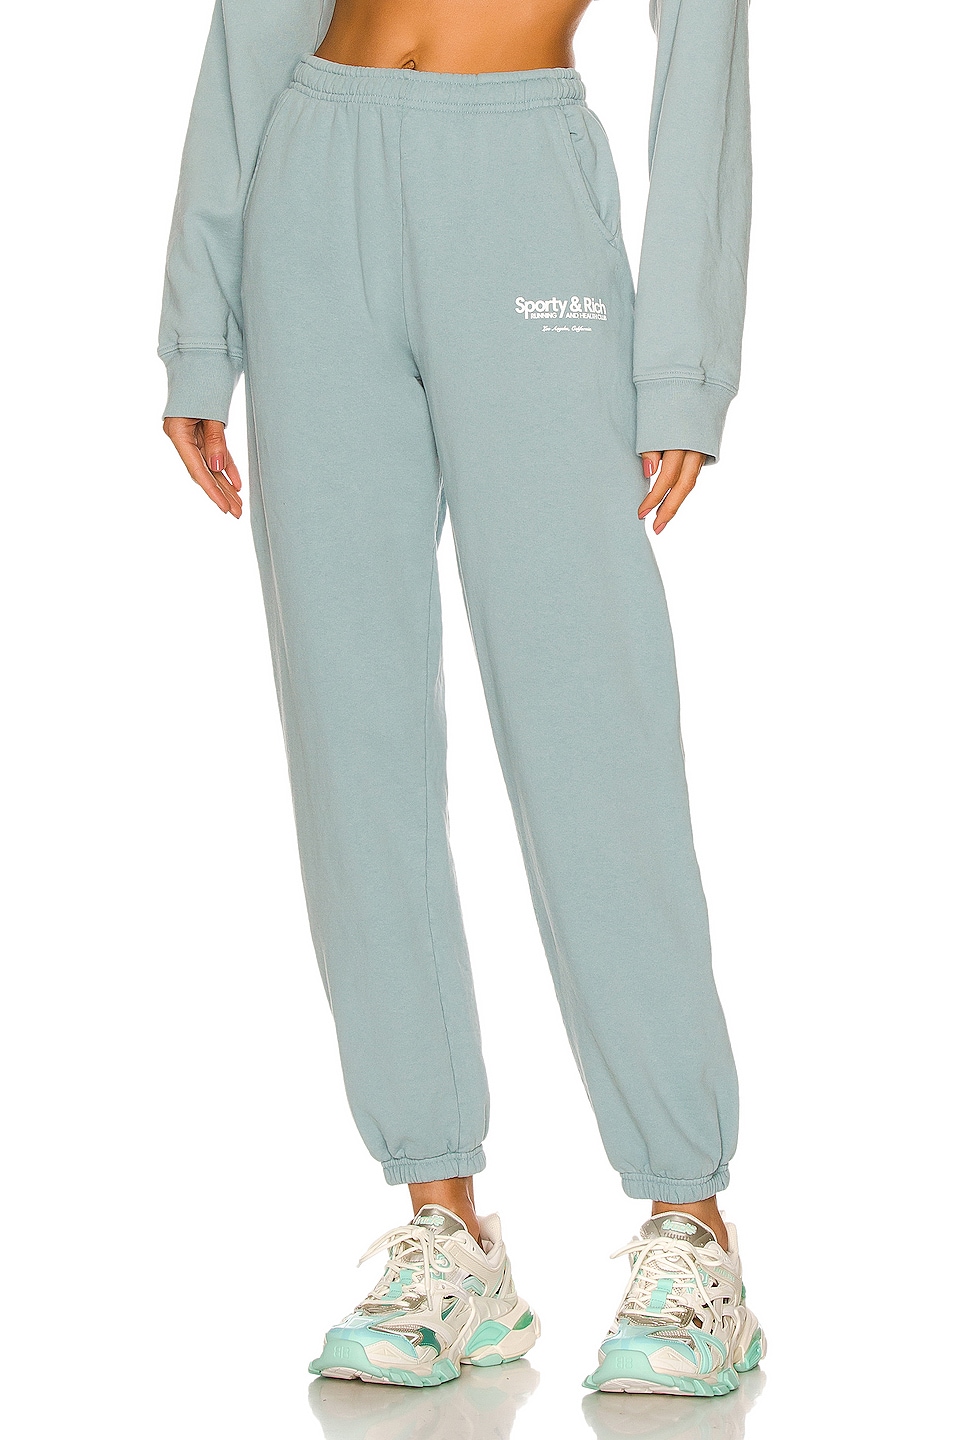 Image 1 of Sporty & Rich Club Sweatpants in Soft Blue & White